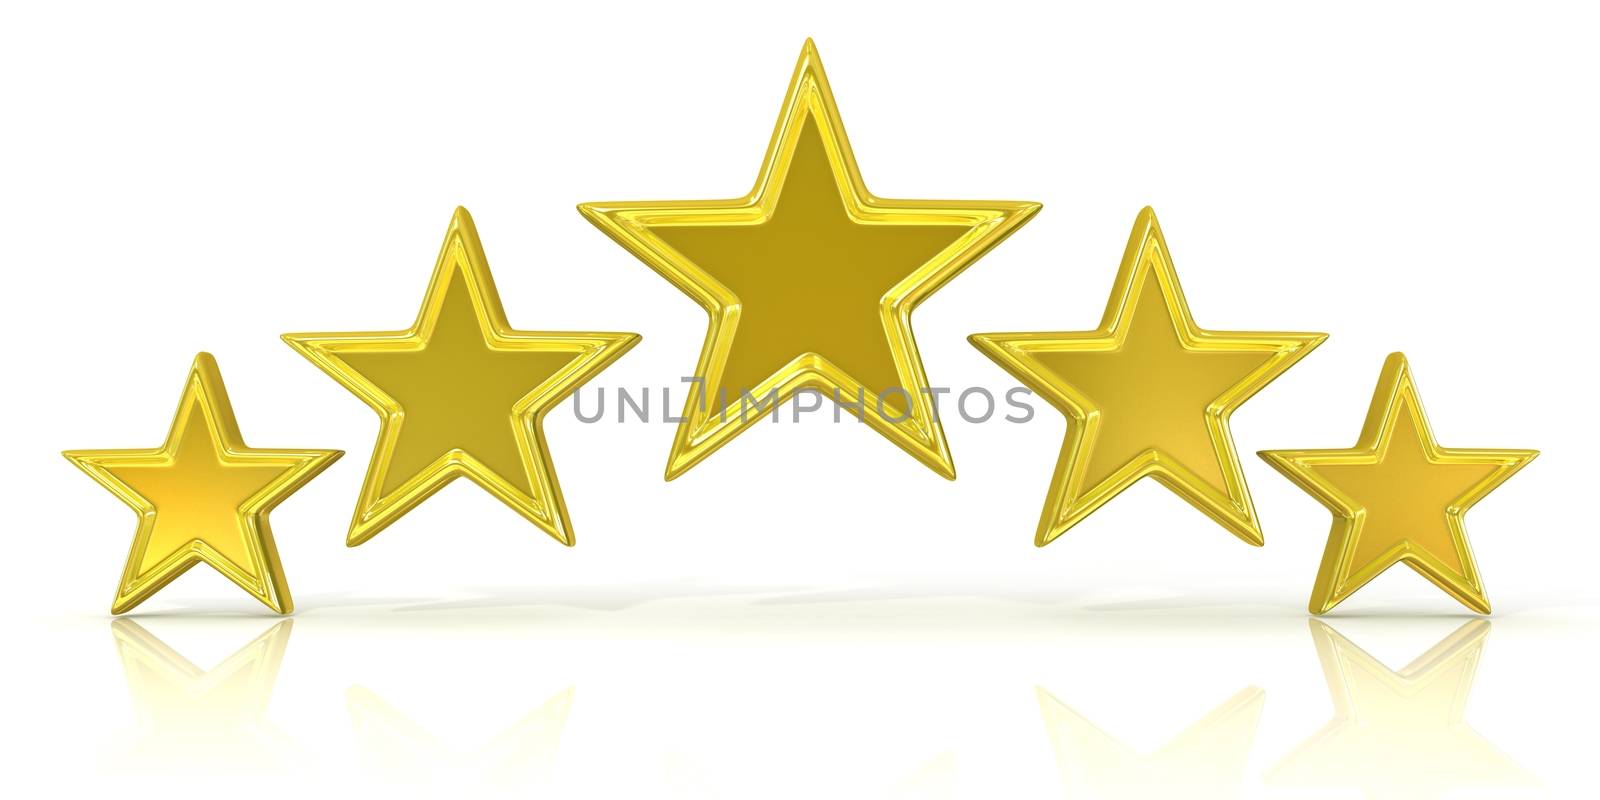 3D rendering of five gold stars isolated on white